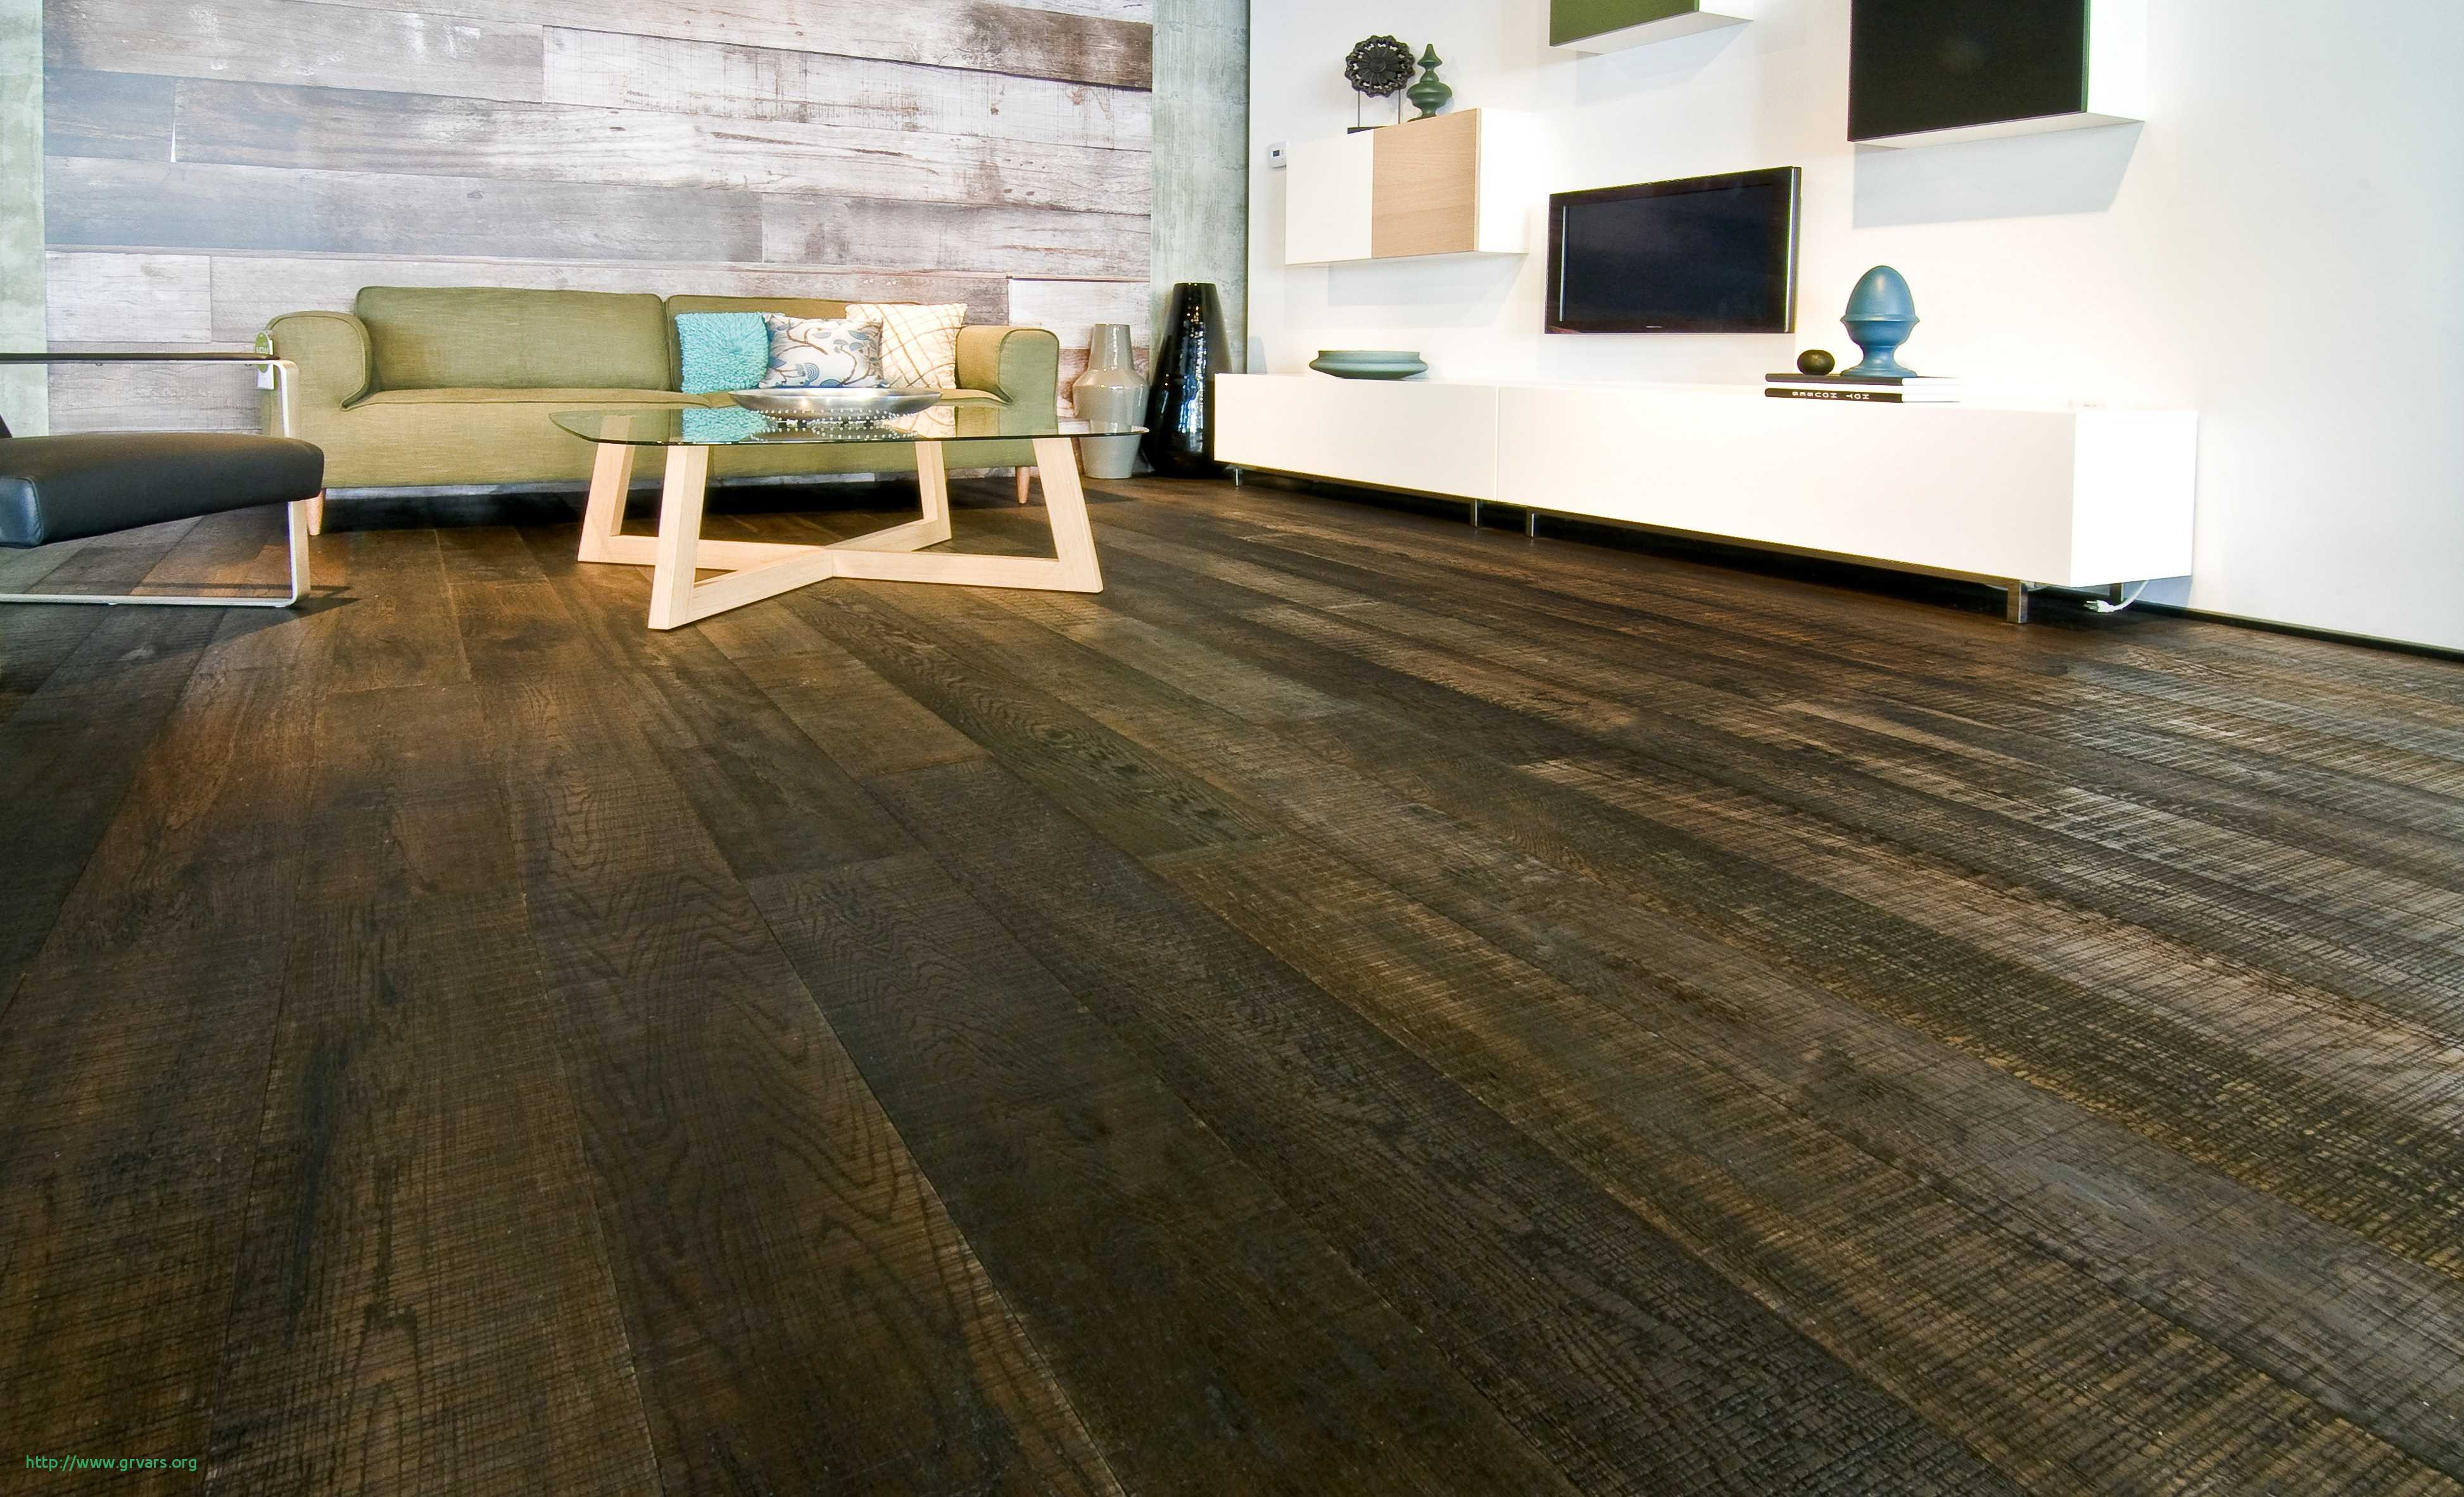 hardwood floor new york of 24 impressionnant most affordable hardwood floors ideas blog within full size of bedroom engaging discount hardwood flooring 5 where to buy inspirational 0d grace place